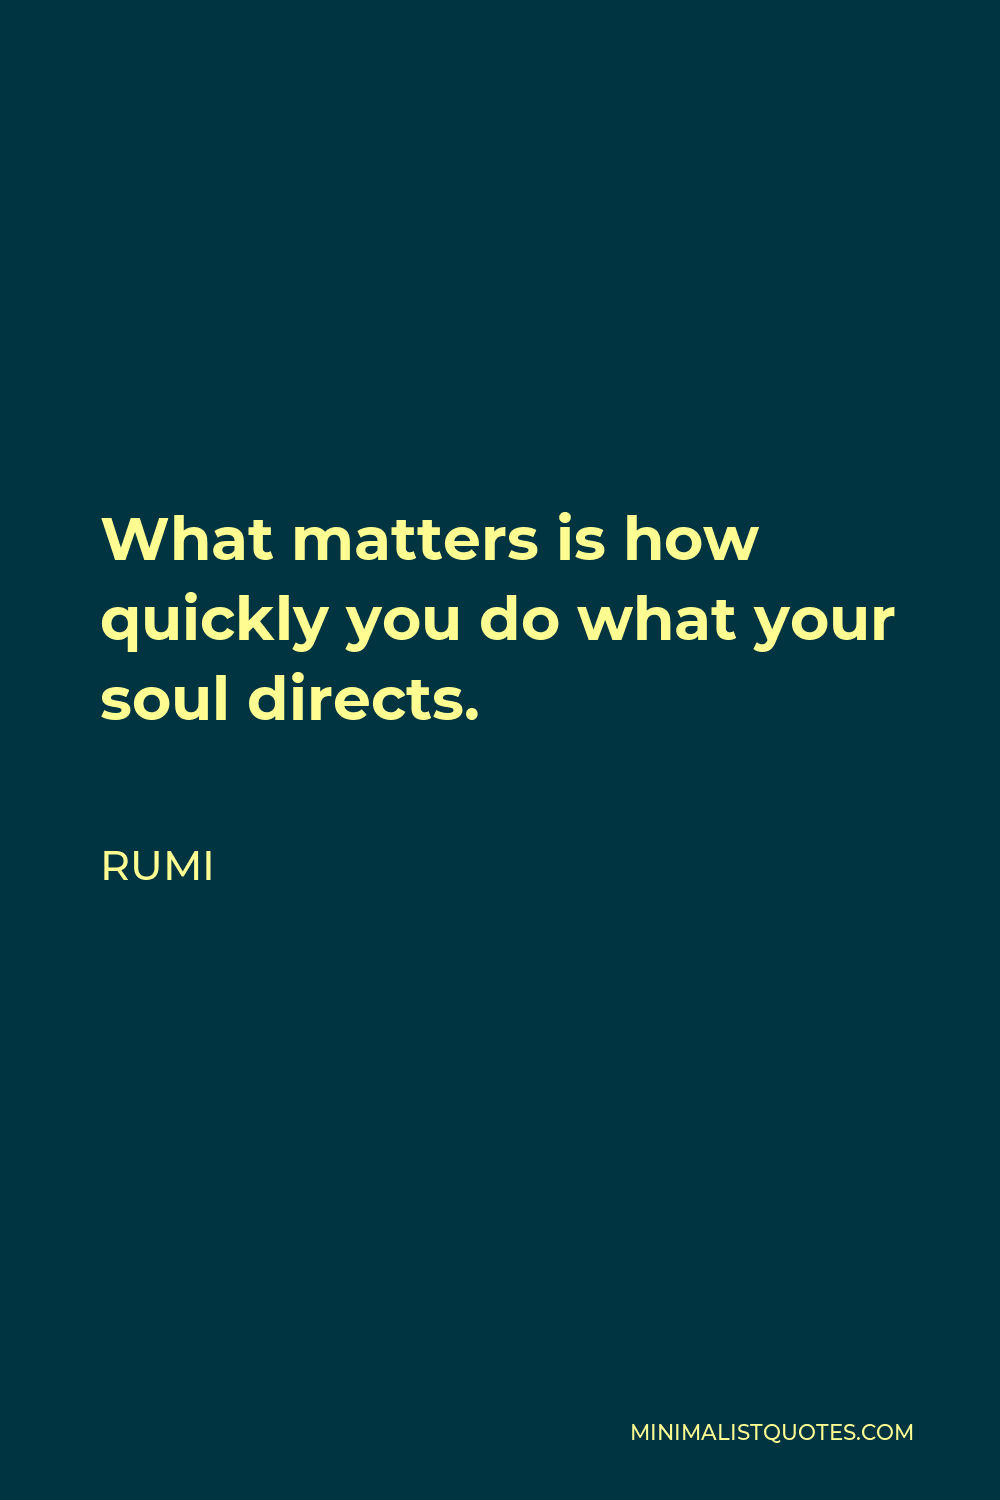 Rumi Quote - What matters is how quickly you do what your soul directs.